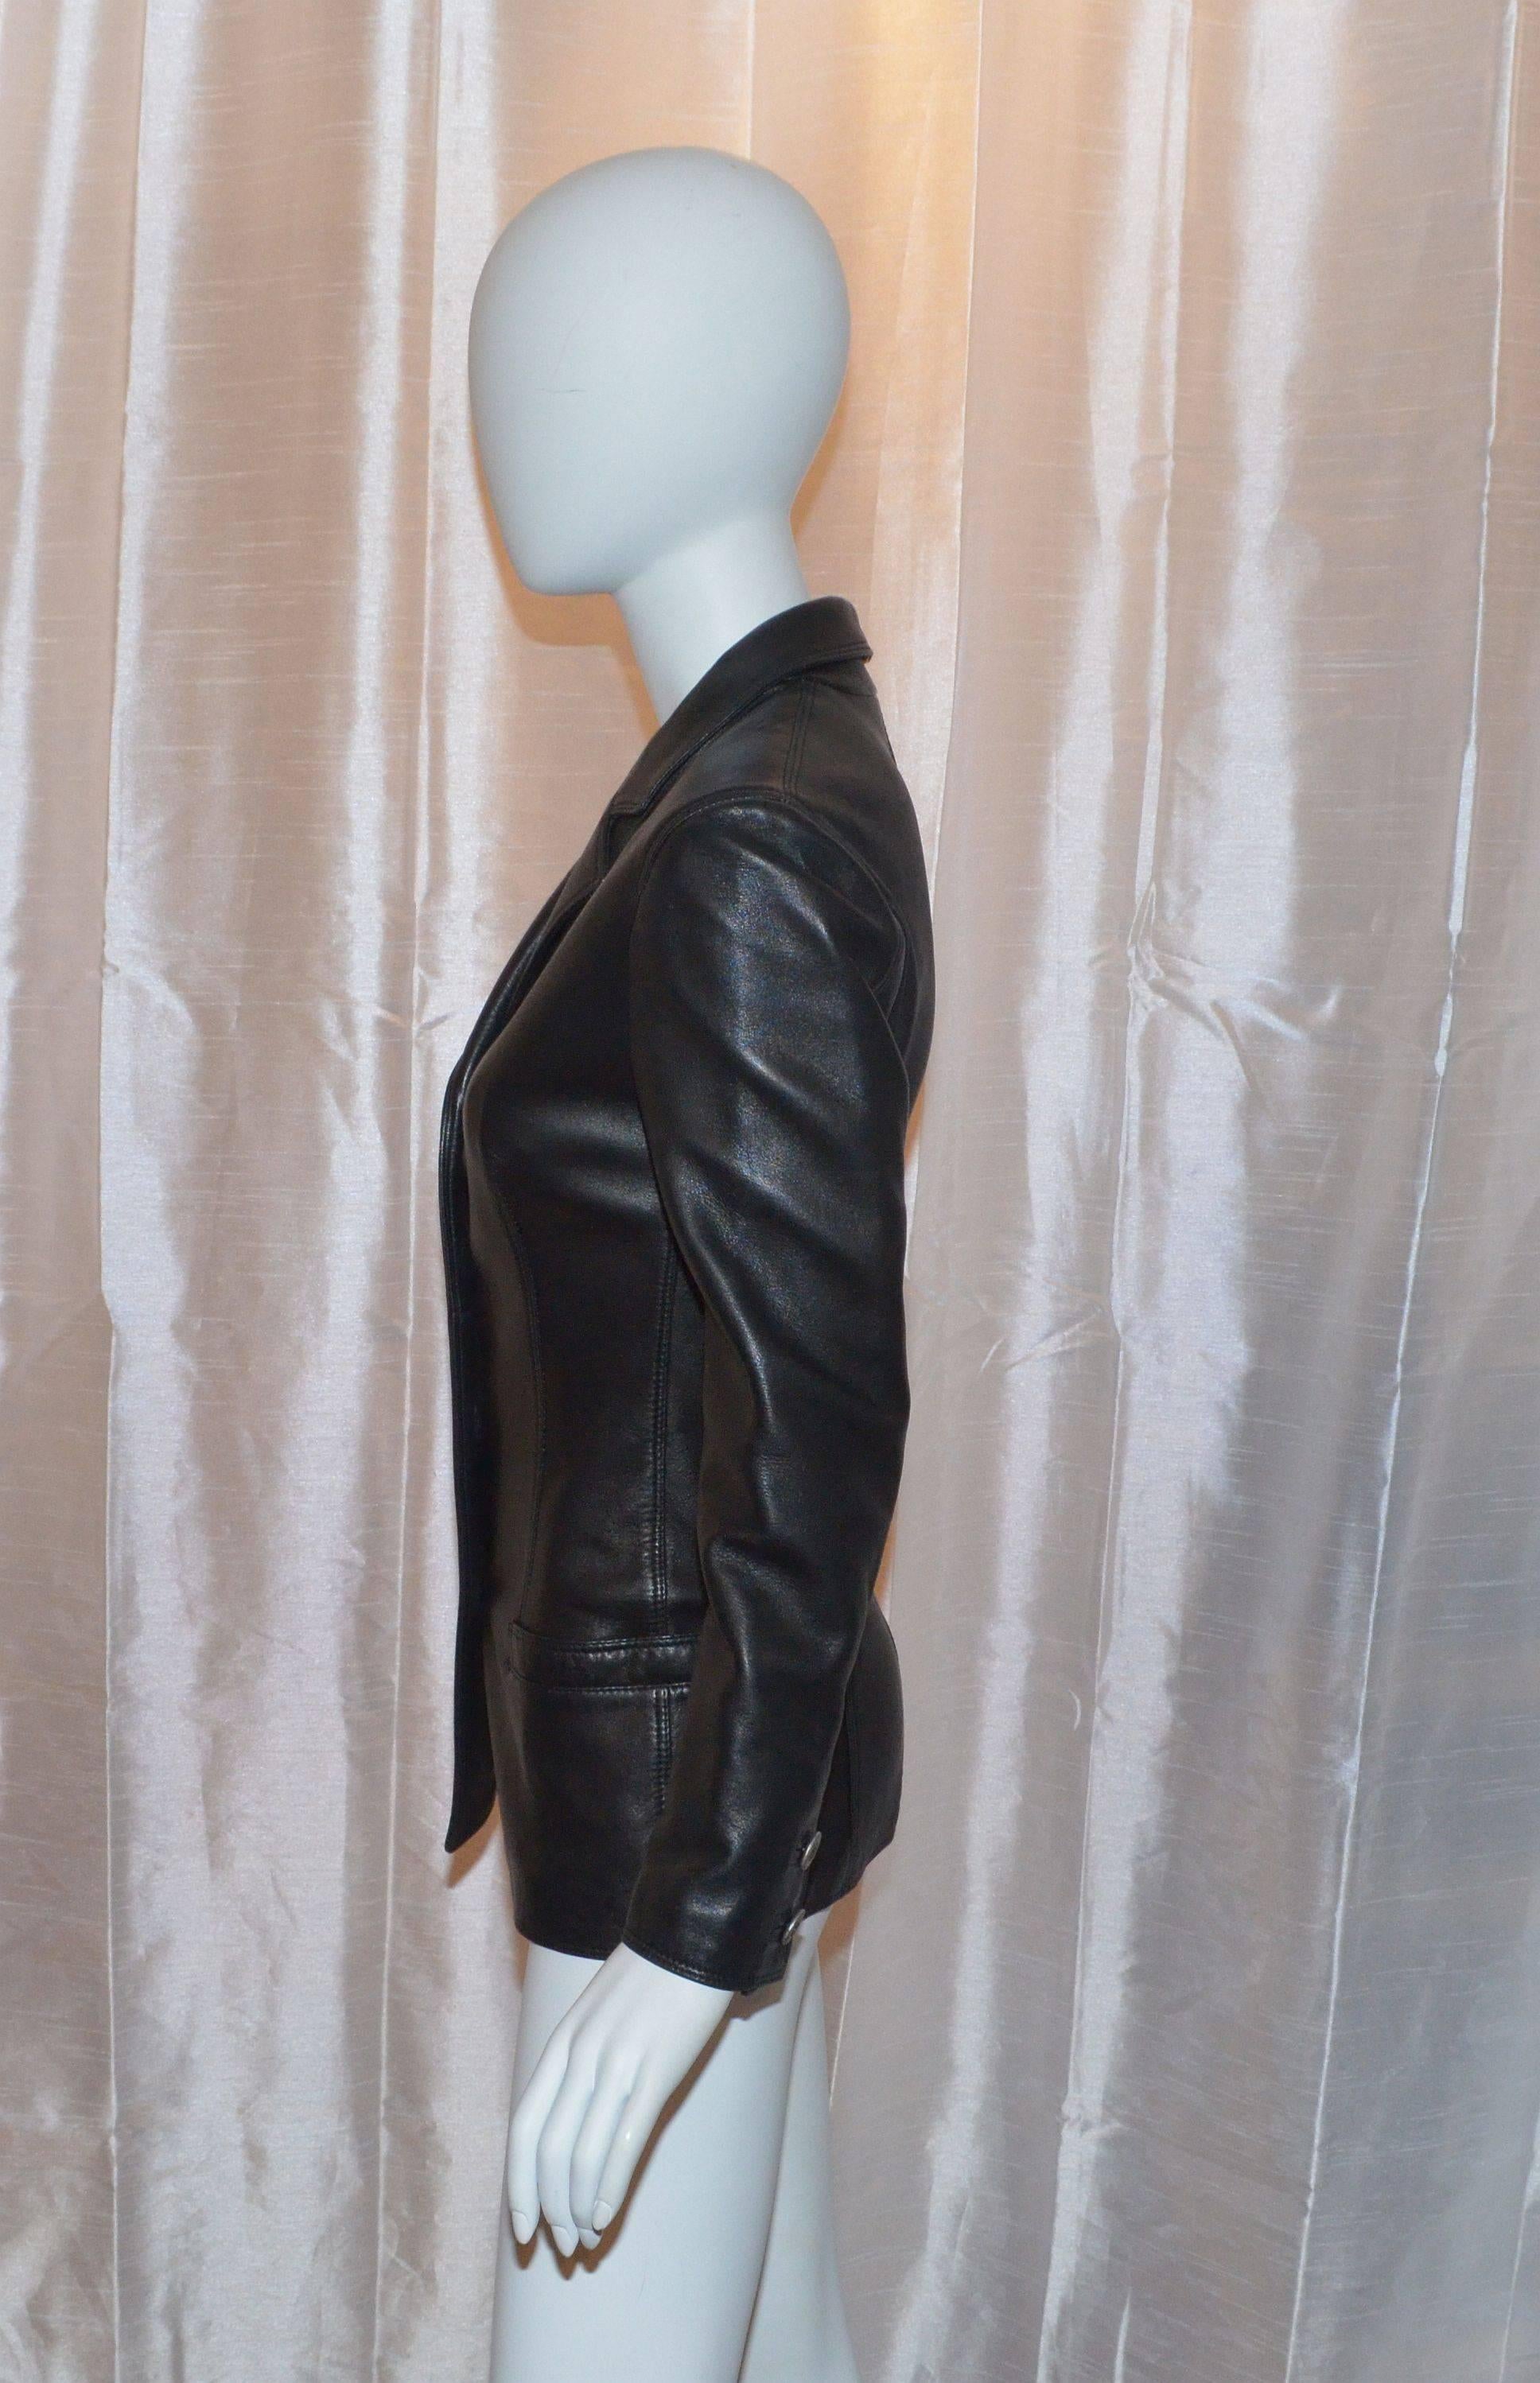 Vintage Gianni Versace leather jacket has silver-tone Medusa button closures along the front center and on the cuffs as well, there are 2 pockets at the waist, made with 100% genuine leather and lined in 100% rayon.  Made in